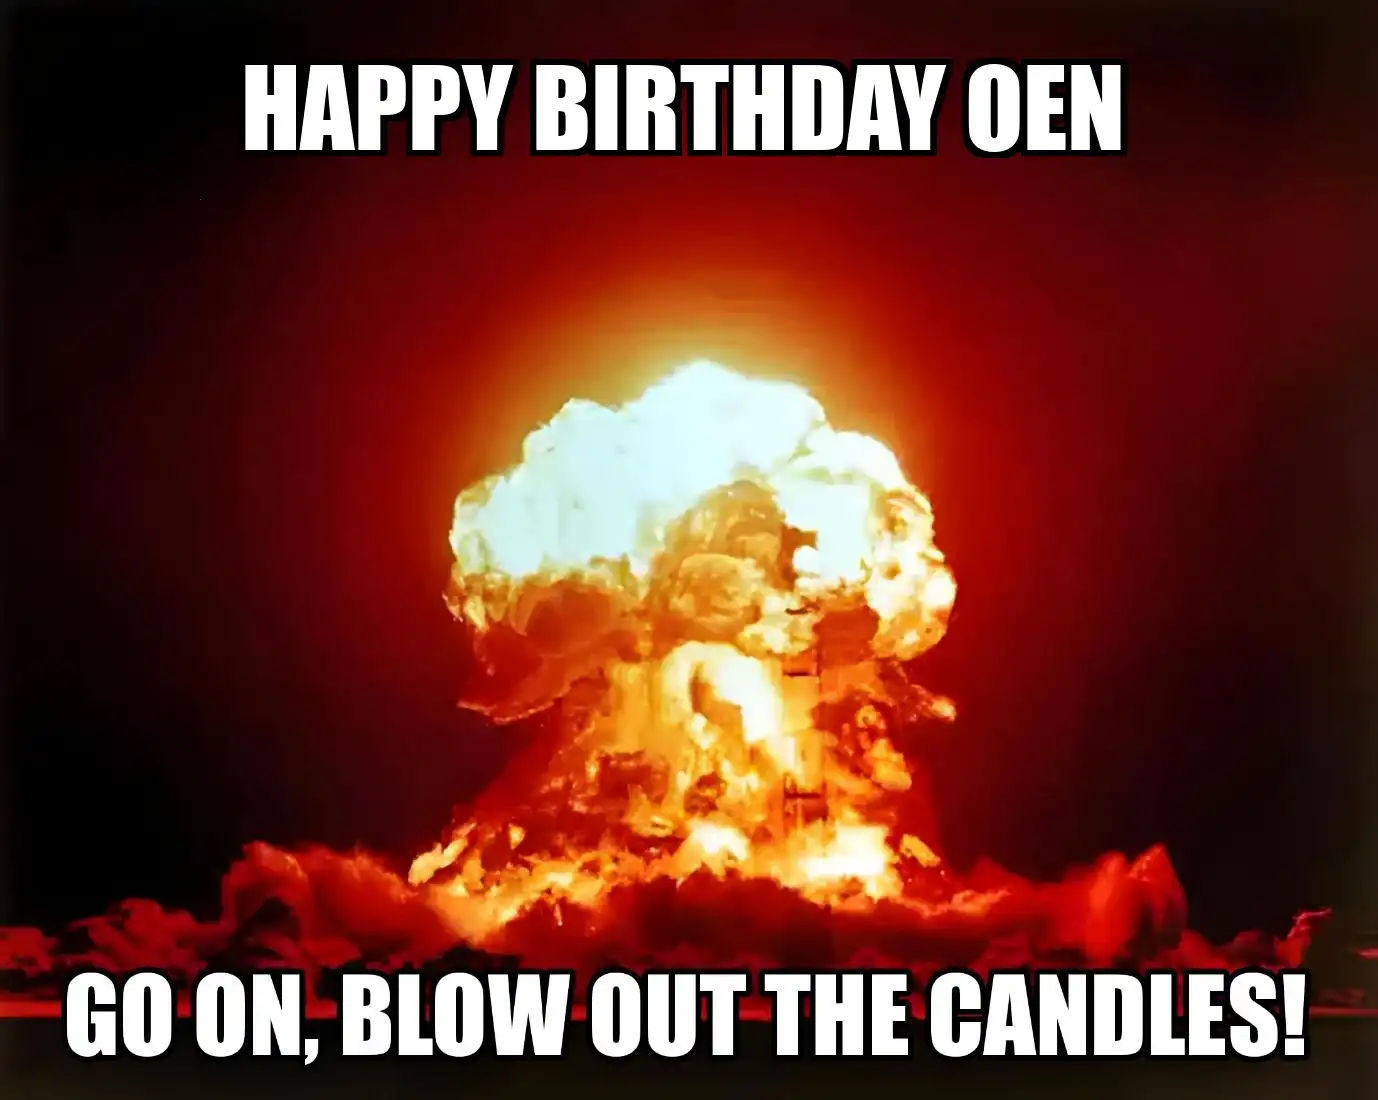 Happy Birthday Oen Go On Blow Out The Candles Meme